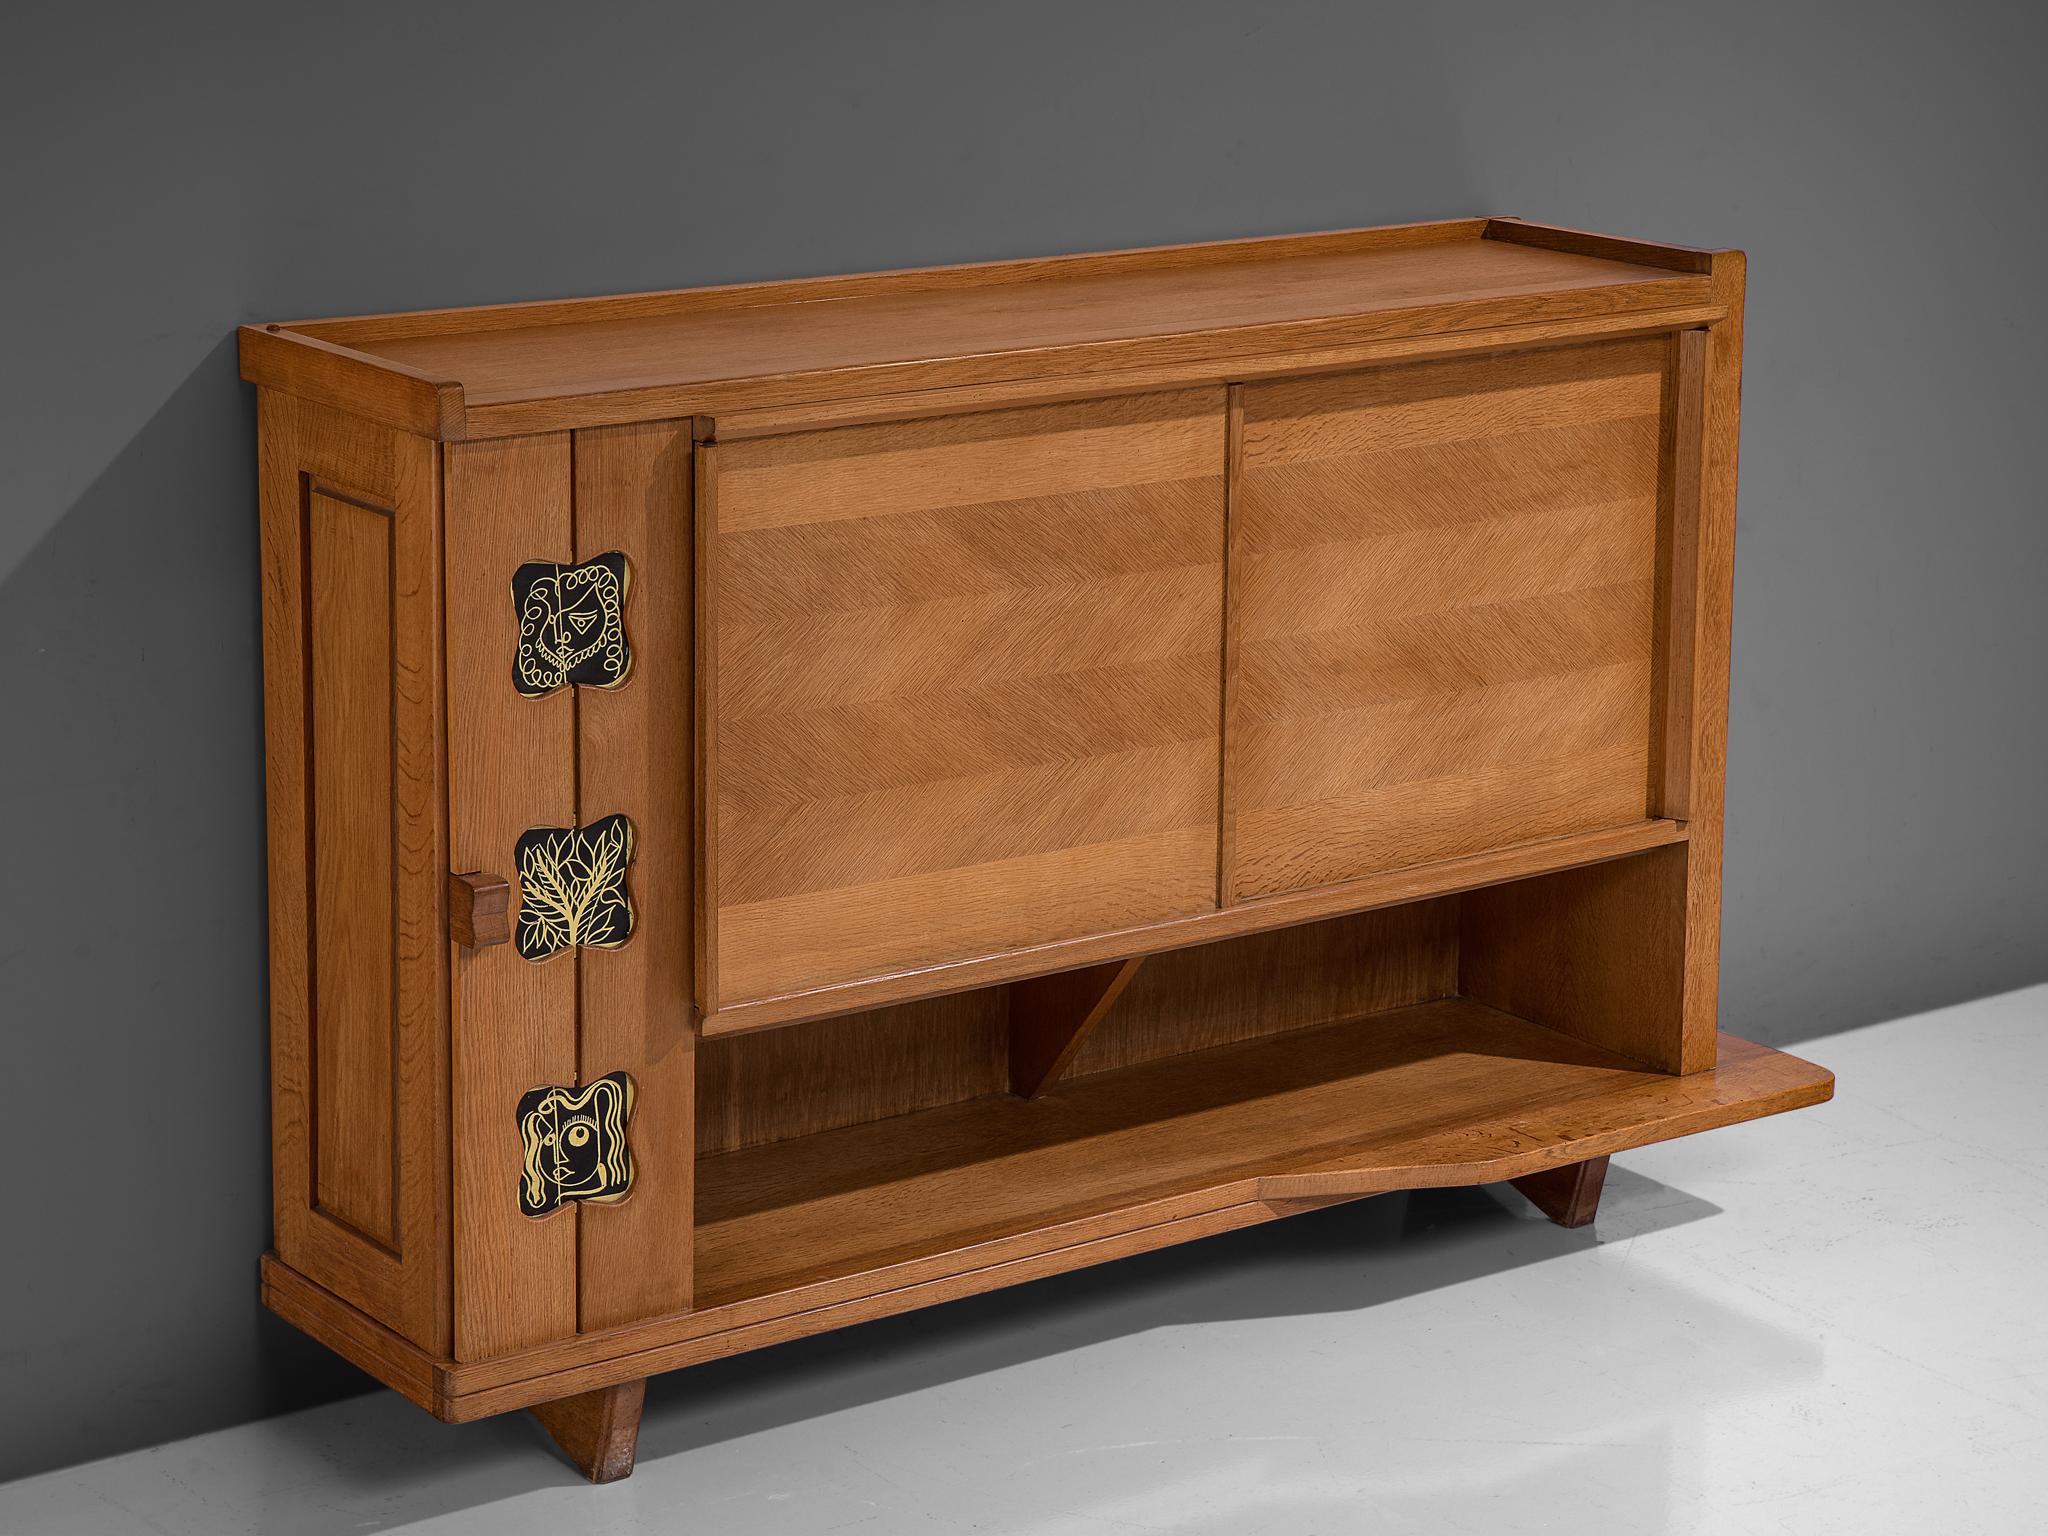 Guillerme et Chambron for Votre Maison, high sideboard, solid oak, France, 1960s

This characteristic cabinet in solid oak is designed by the French designer duo Jacques Chambron (1914-2001) and Robert Guillerme, (1913-1990). It features two sliding